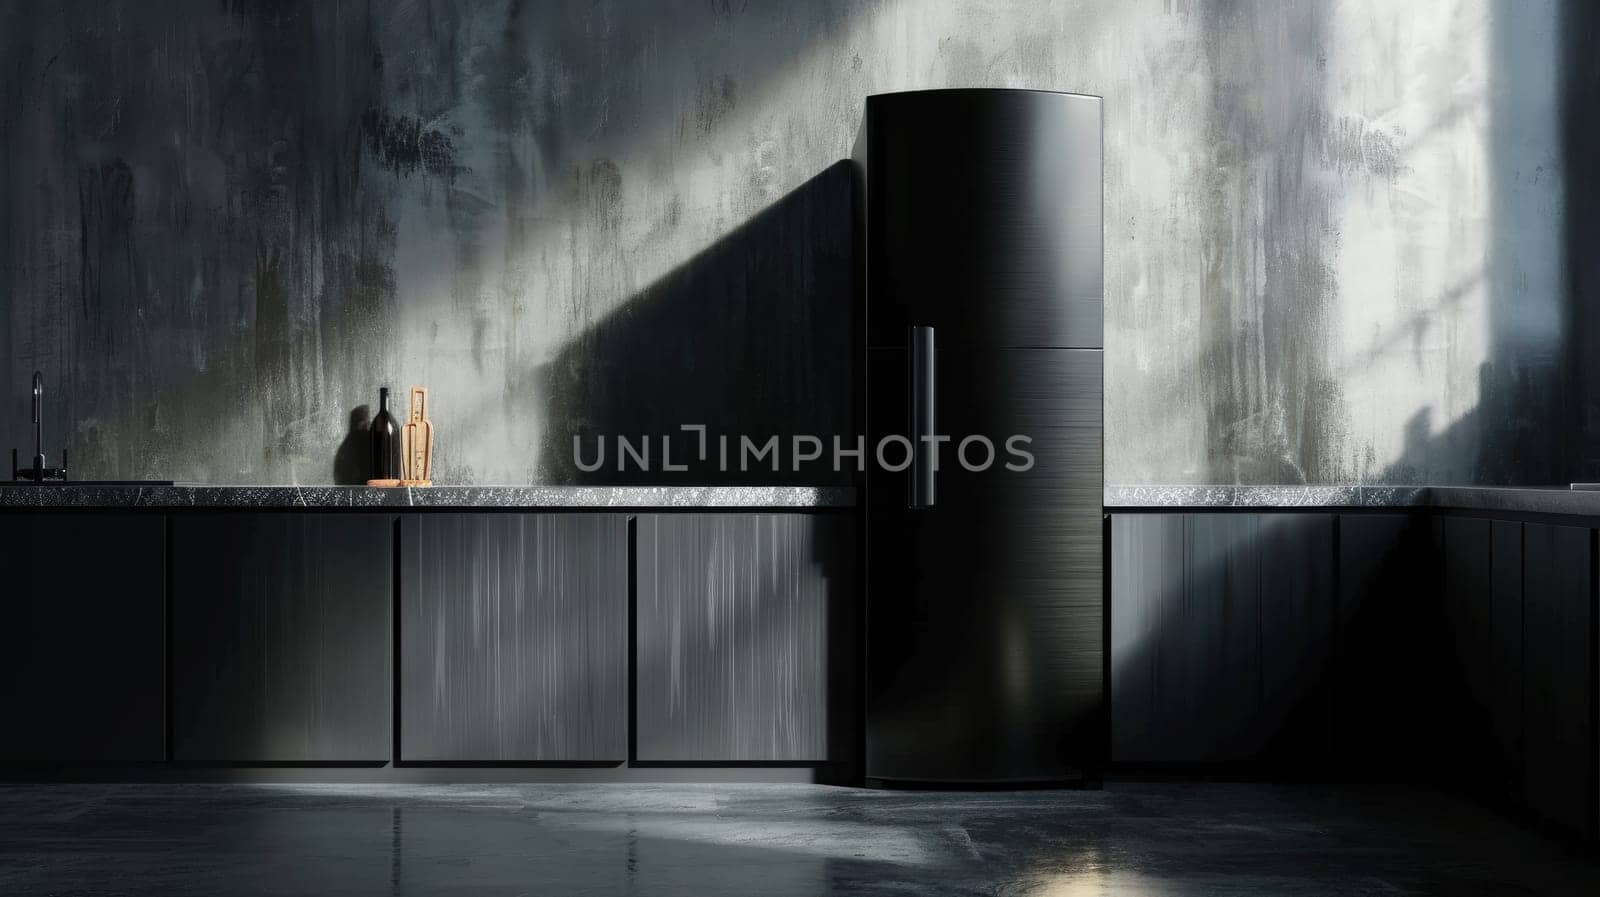 Modern Industrial Kitchen with Black Refrigerator and Concrete Wall